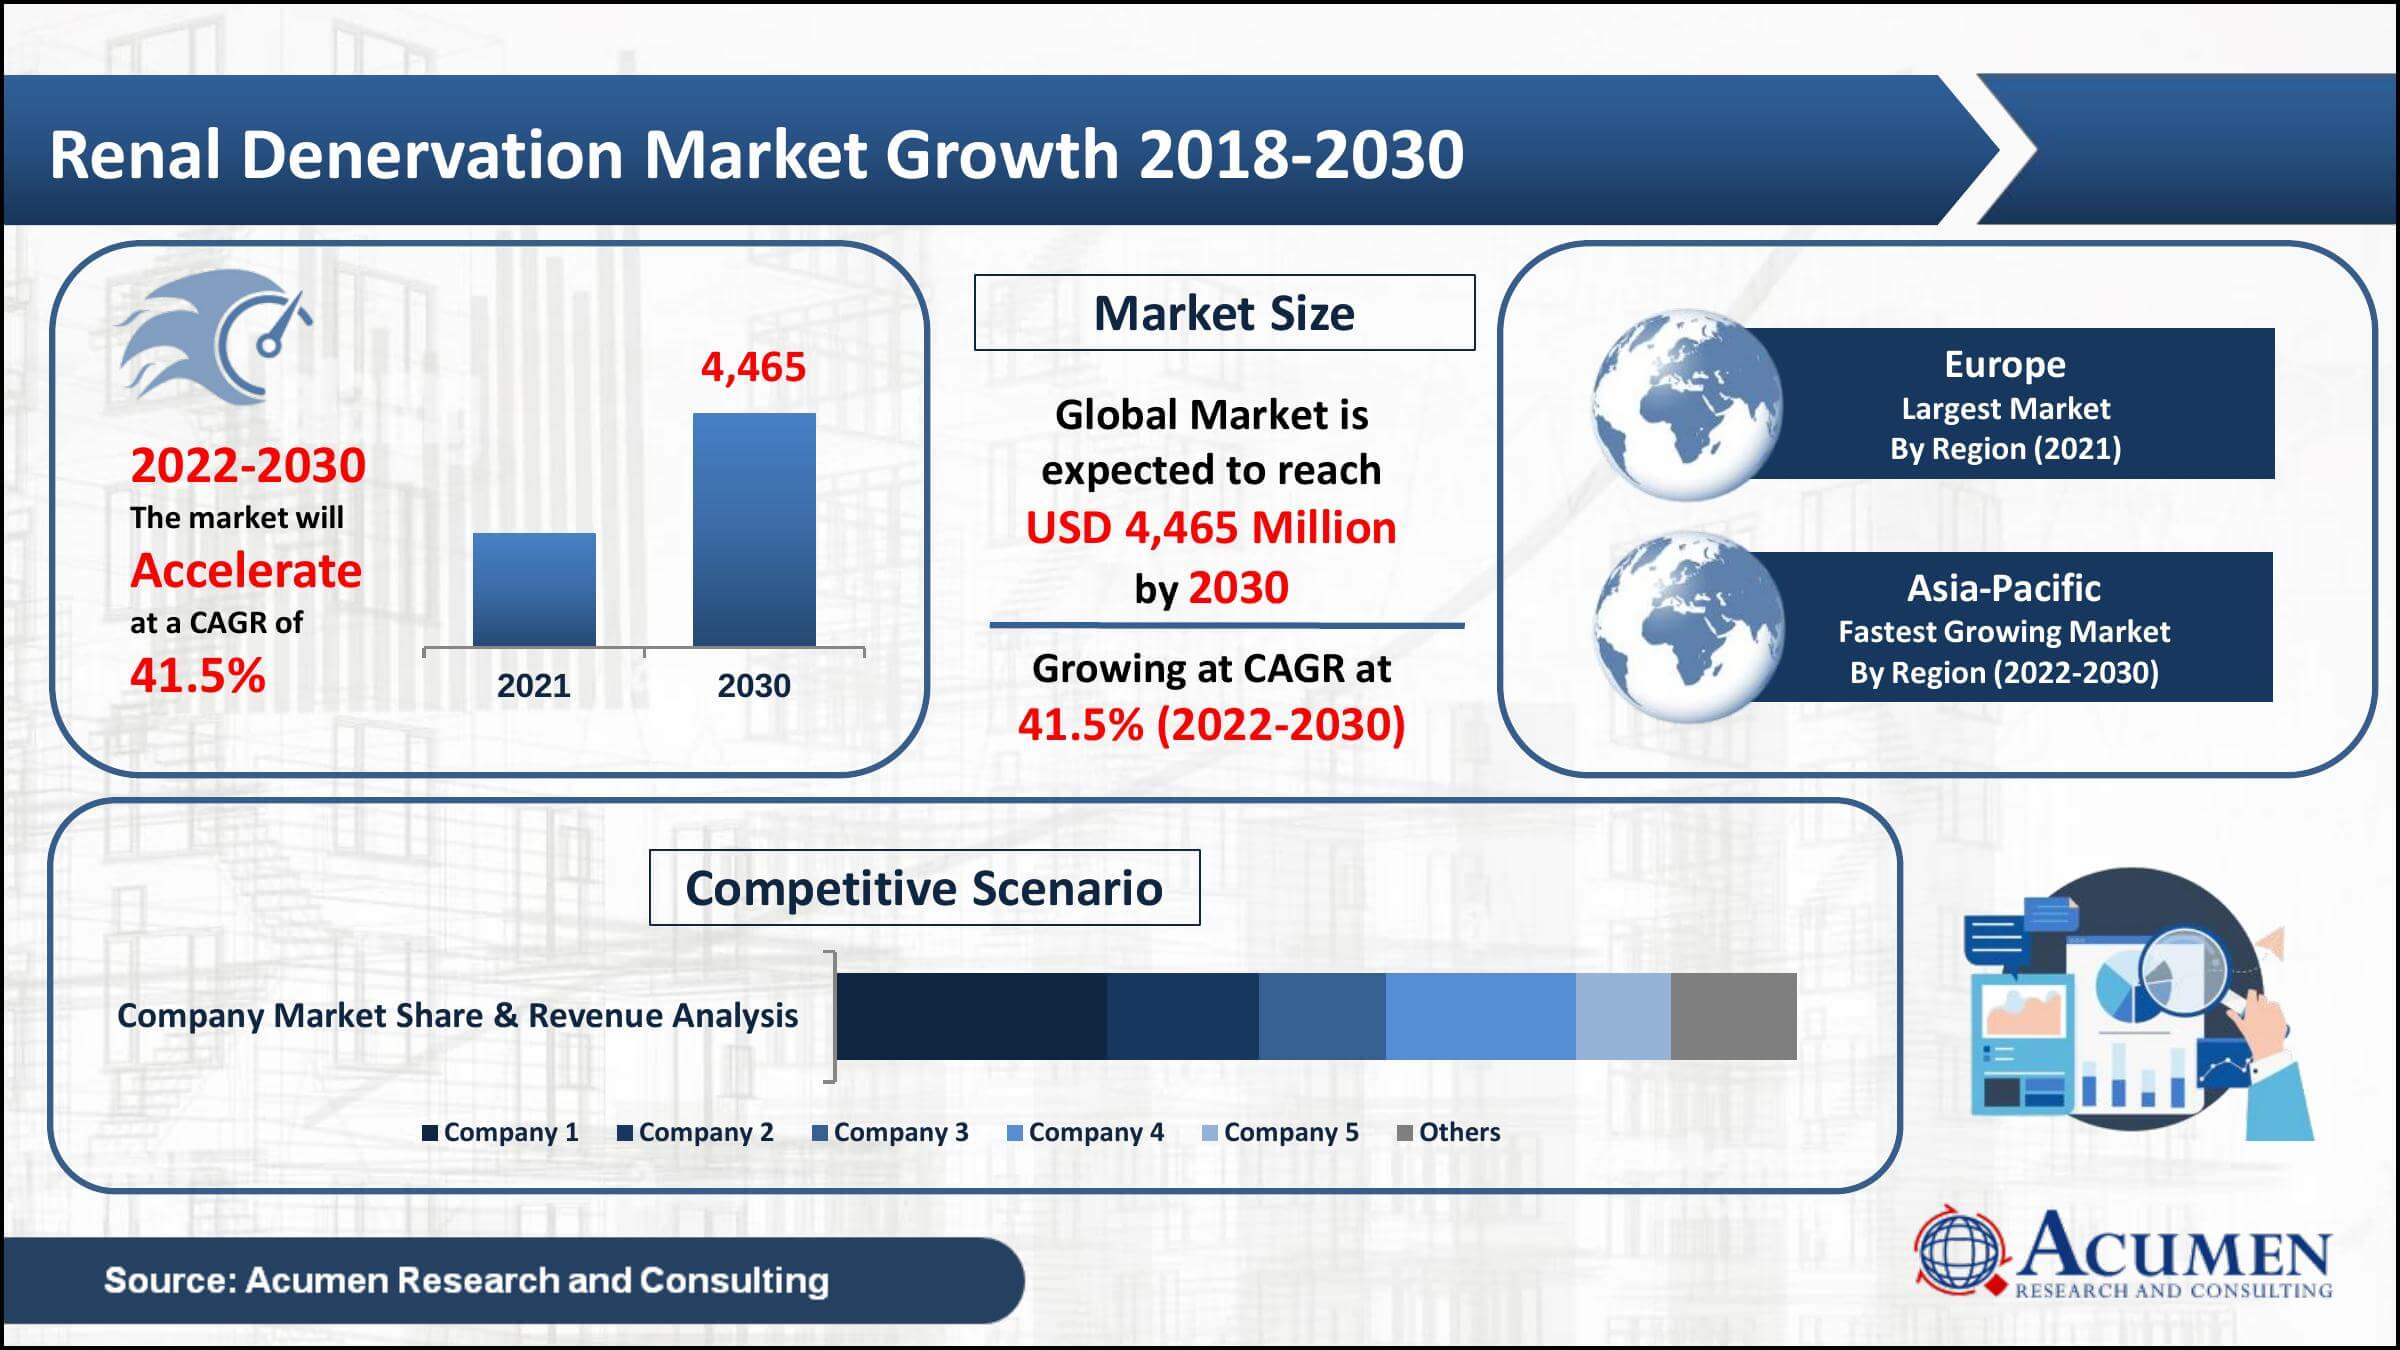 Global renal denervation market revenue collected USD 198 Million in 2021, with a 41.5% CAGR between 2022 and 2030